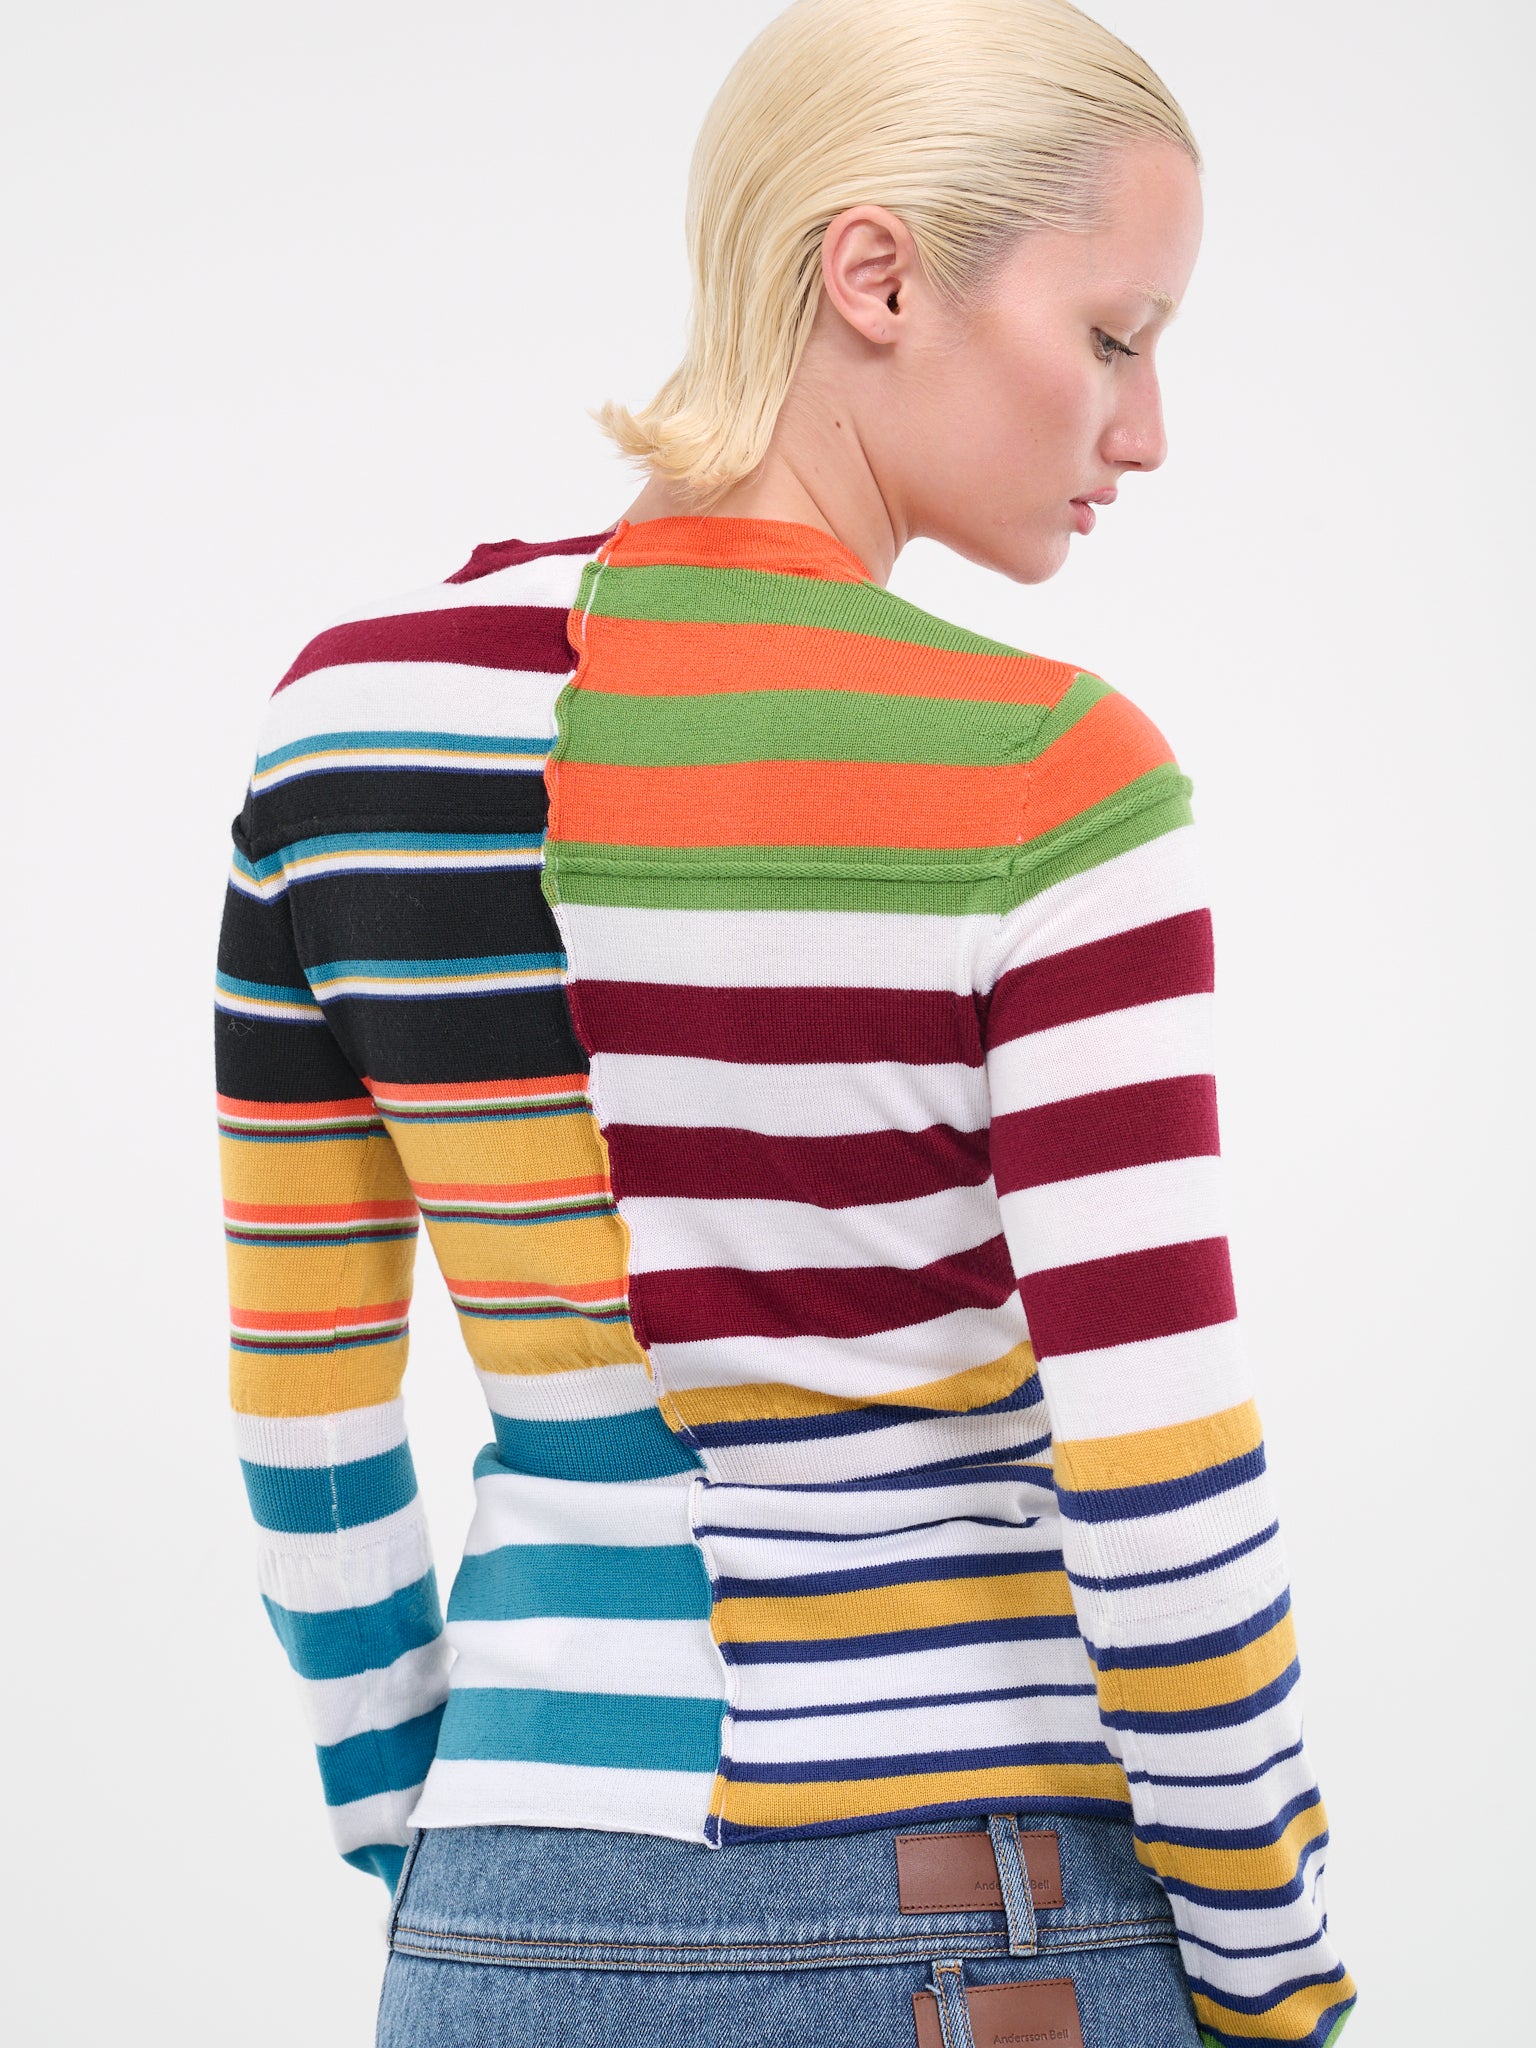  Womens Sweat Shirt : Colorful Striped Patchwork